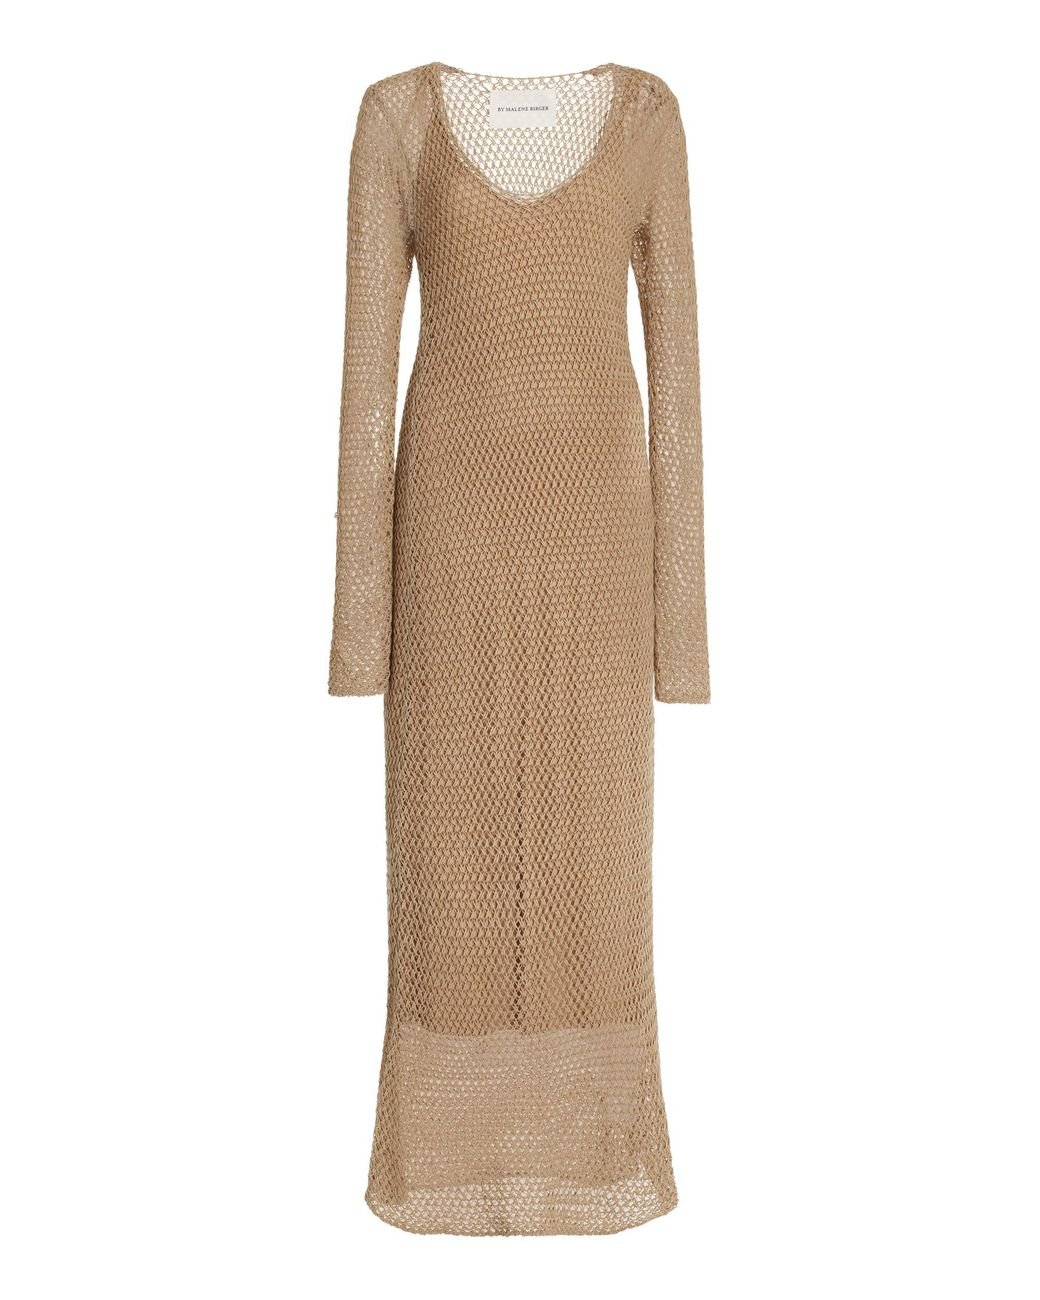 By Malene Birger Evine Knit Maxi Dress in Brown | Lyst